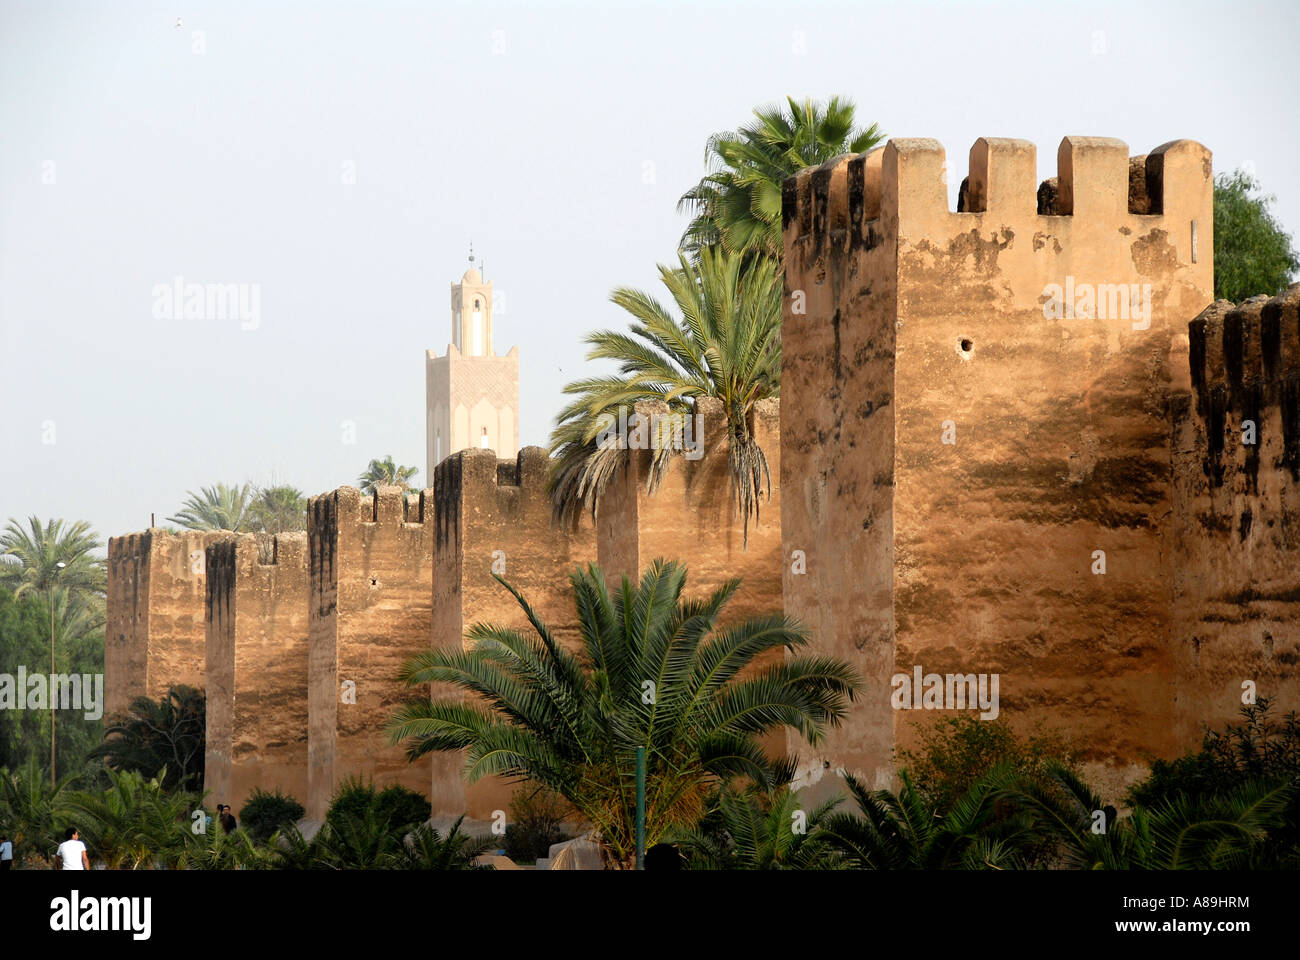 Old mighty city walls with minaret Taroudannt southwestern Morocco Stock Photo